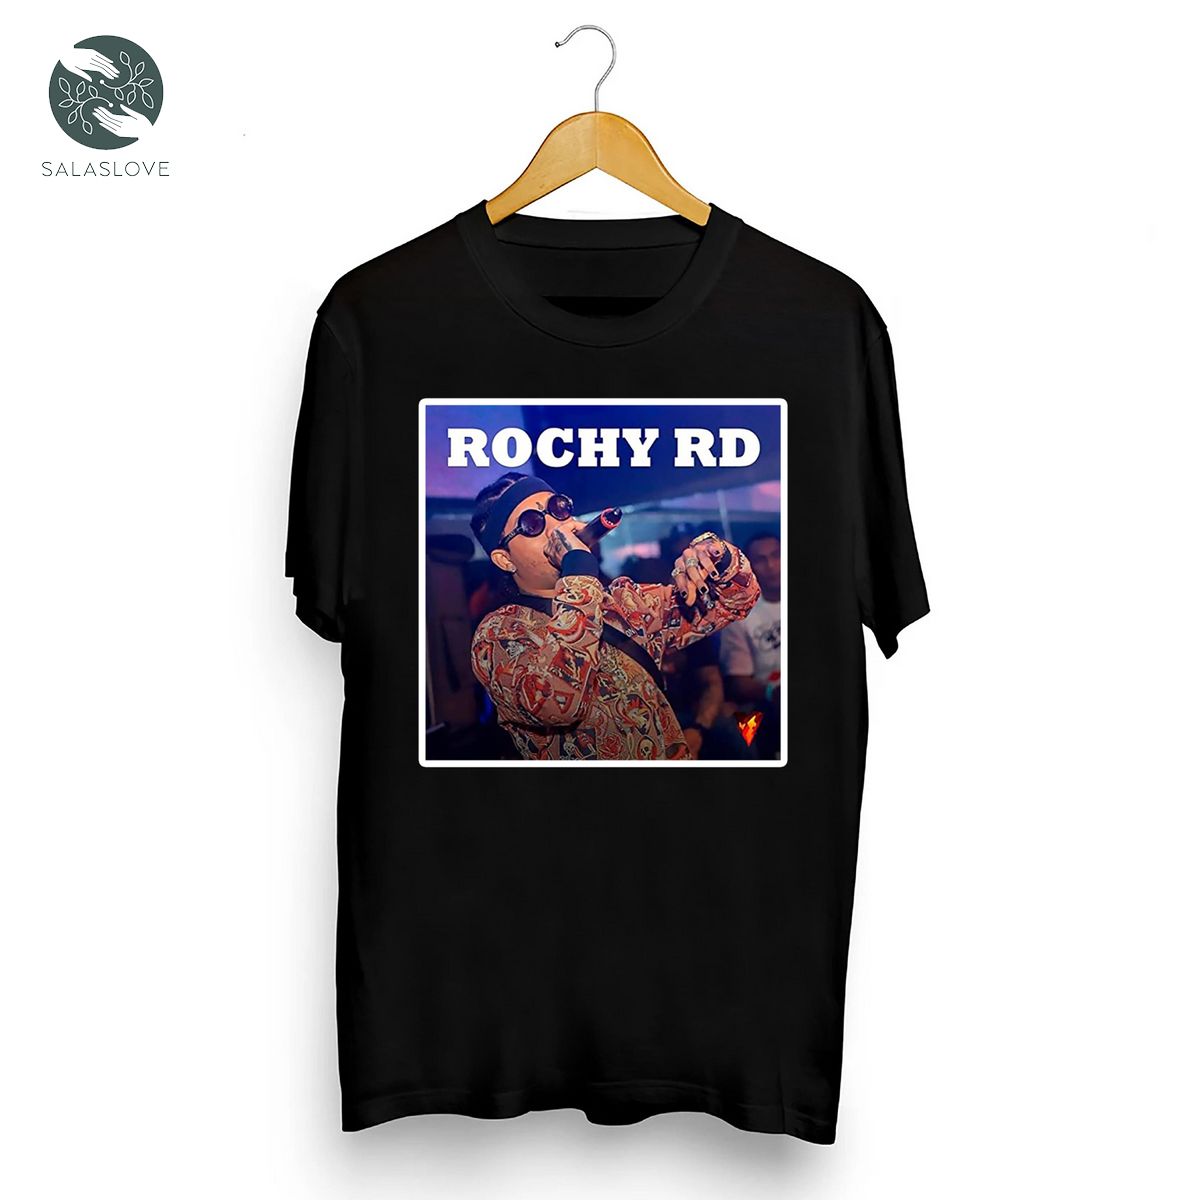 Rochy RD Based Rapper And Vocalist T-shirt